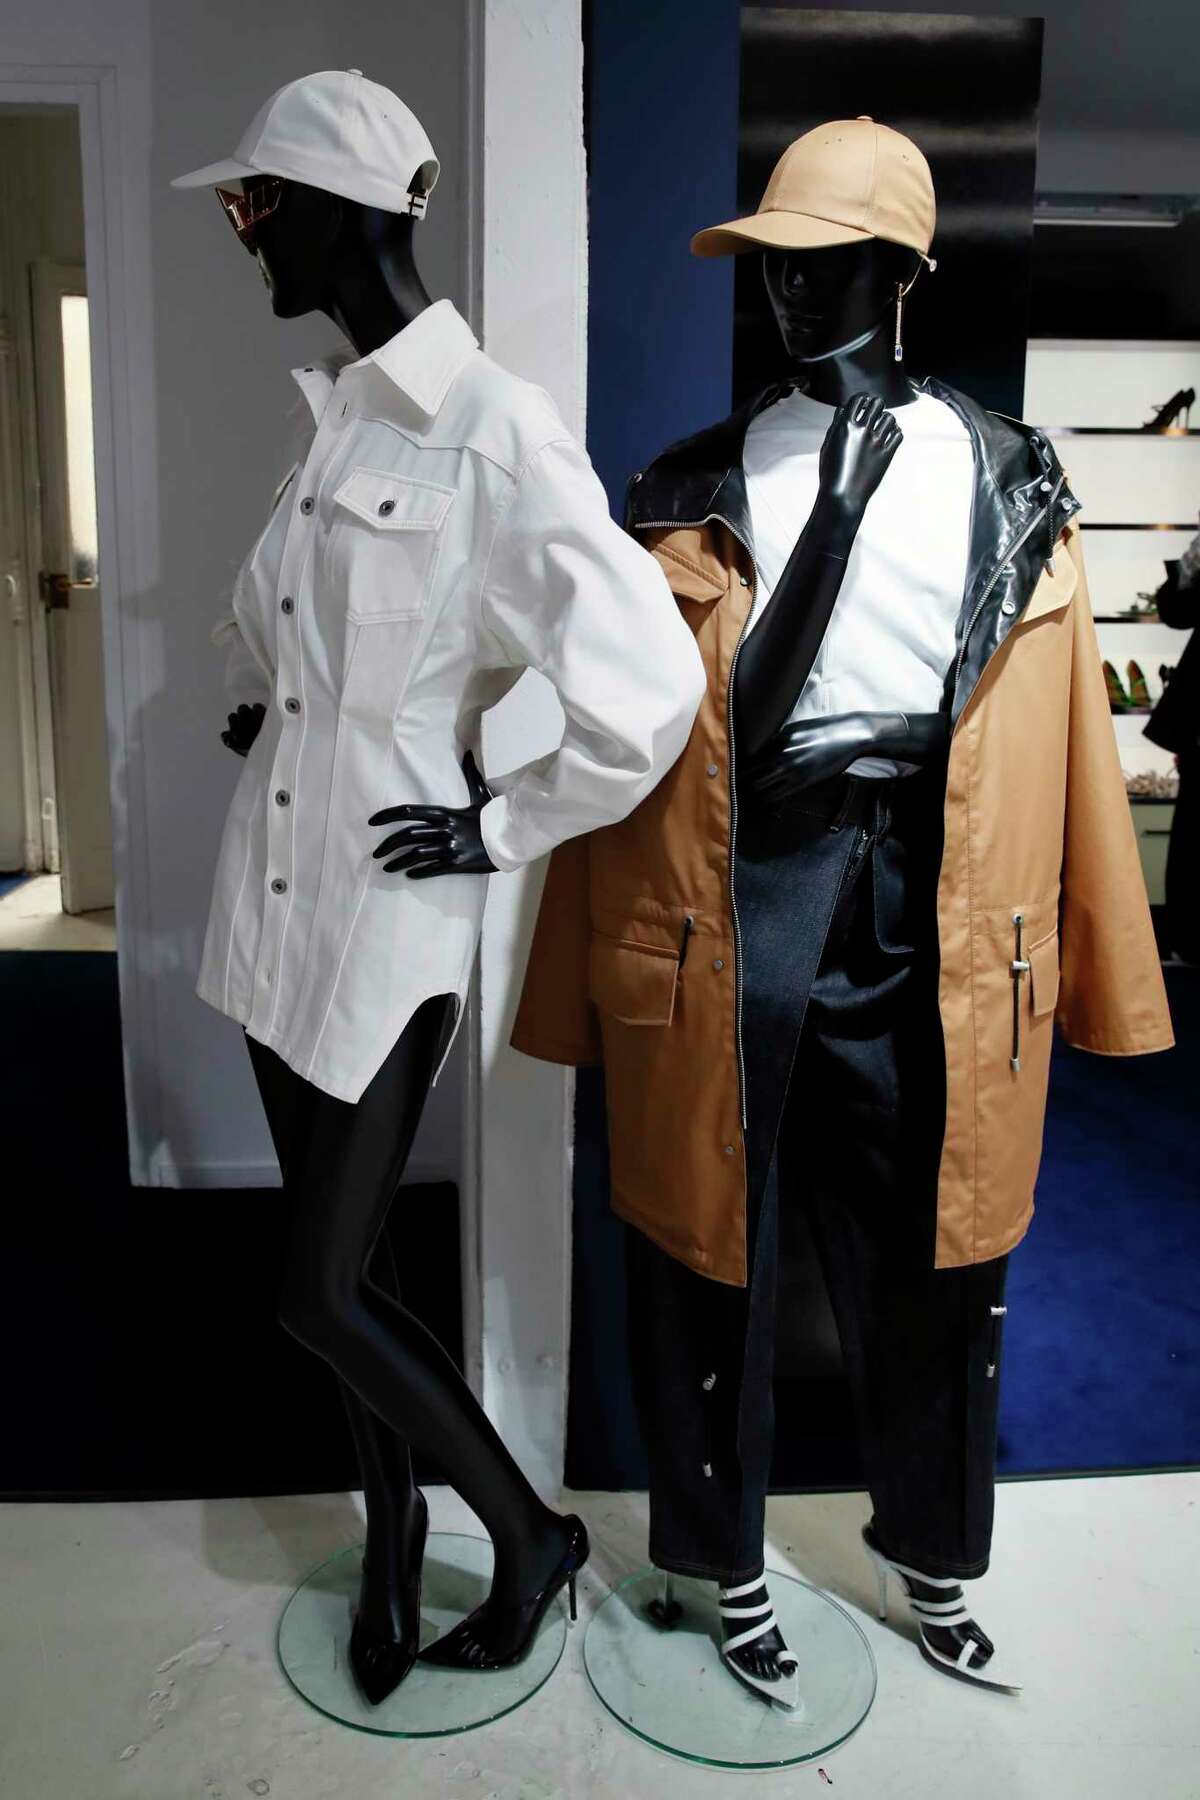 Designs are displayed as Rihanna unveils her first fashion designs for Fenty at a pop-up store in Paris, France, Wednesday, May 22, 2019. Singer Rihanna is the first black woman in history to head up a major Parisian luxury house, and the collection, named after the singer turned designer's last name, comprises of ready-to-wear, footwear, accessories, and eyewear and is available for sale Paris' Le Marais area from Friday and will debut online May 29.